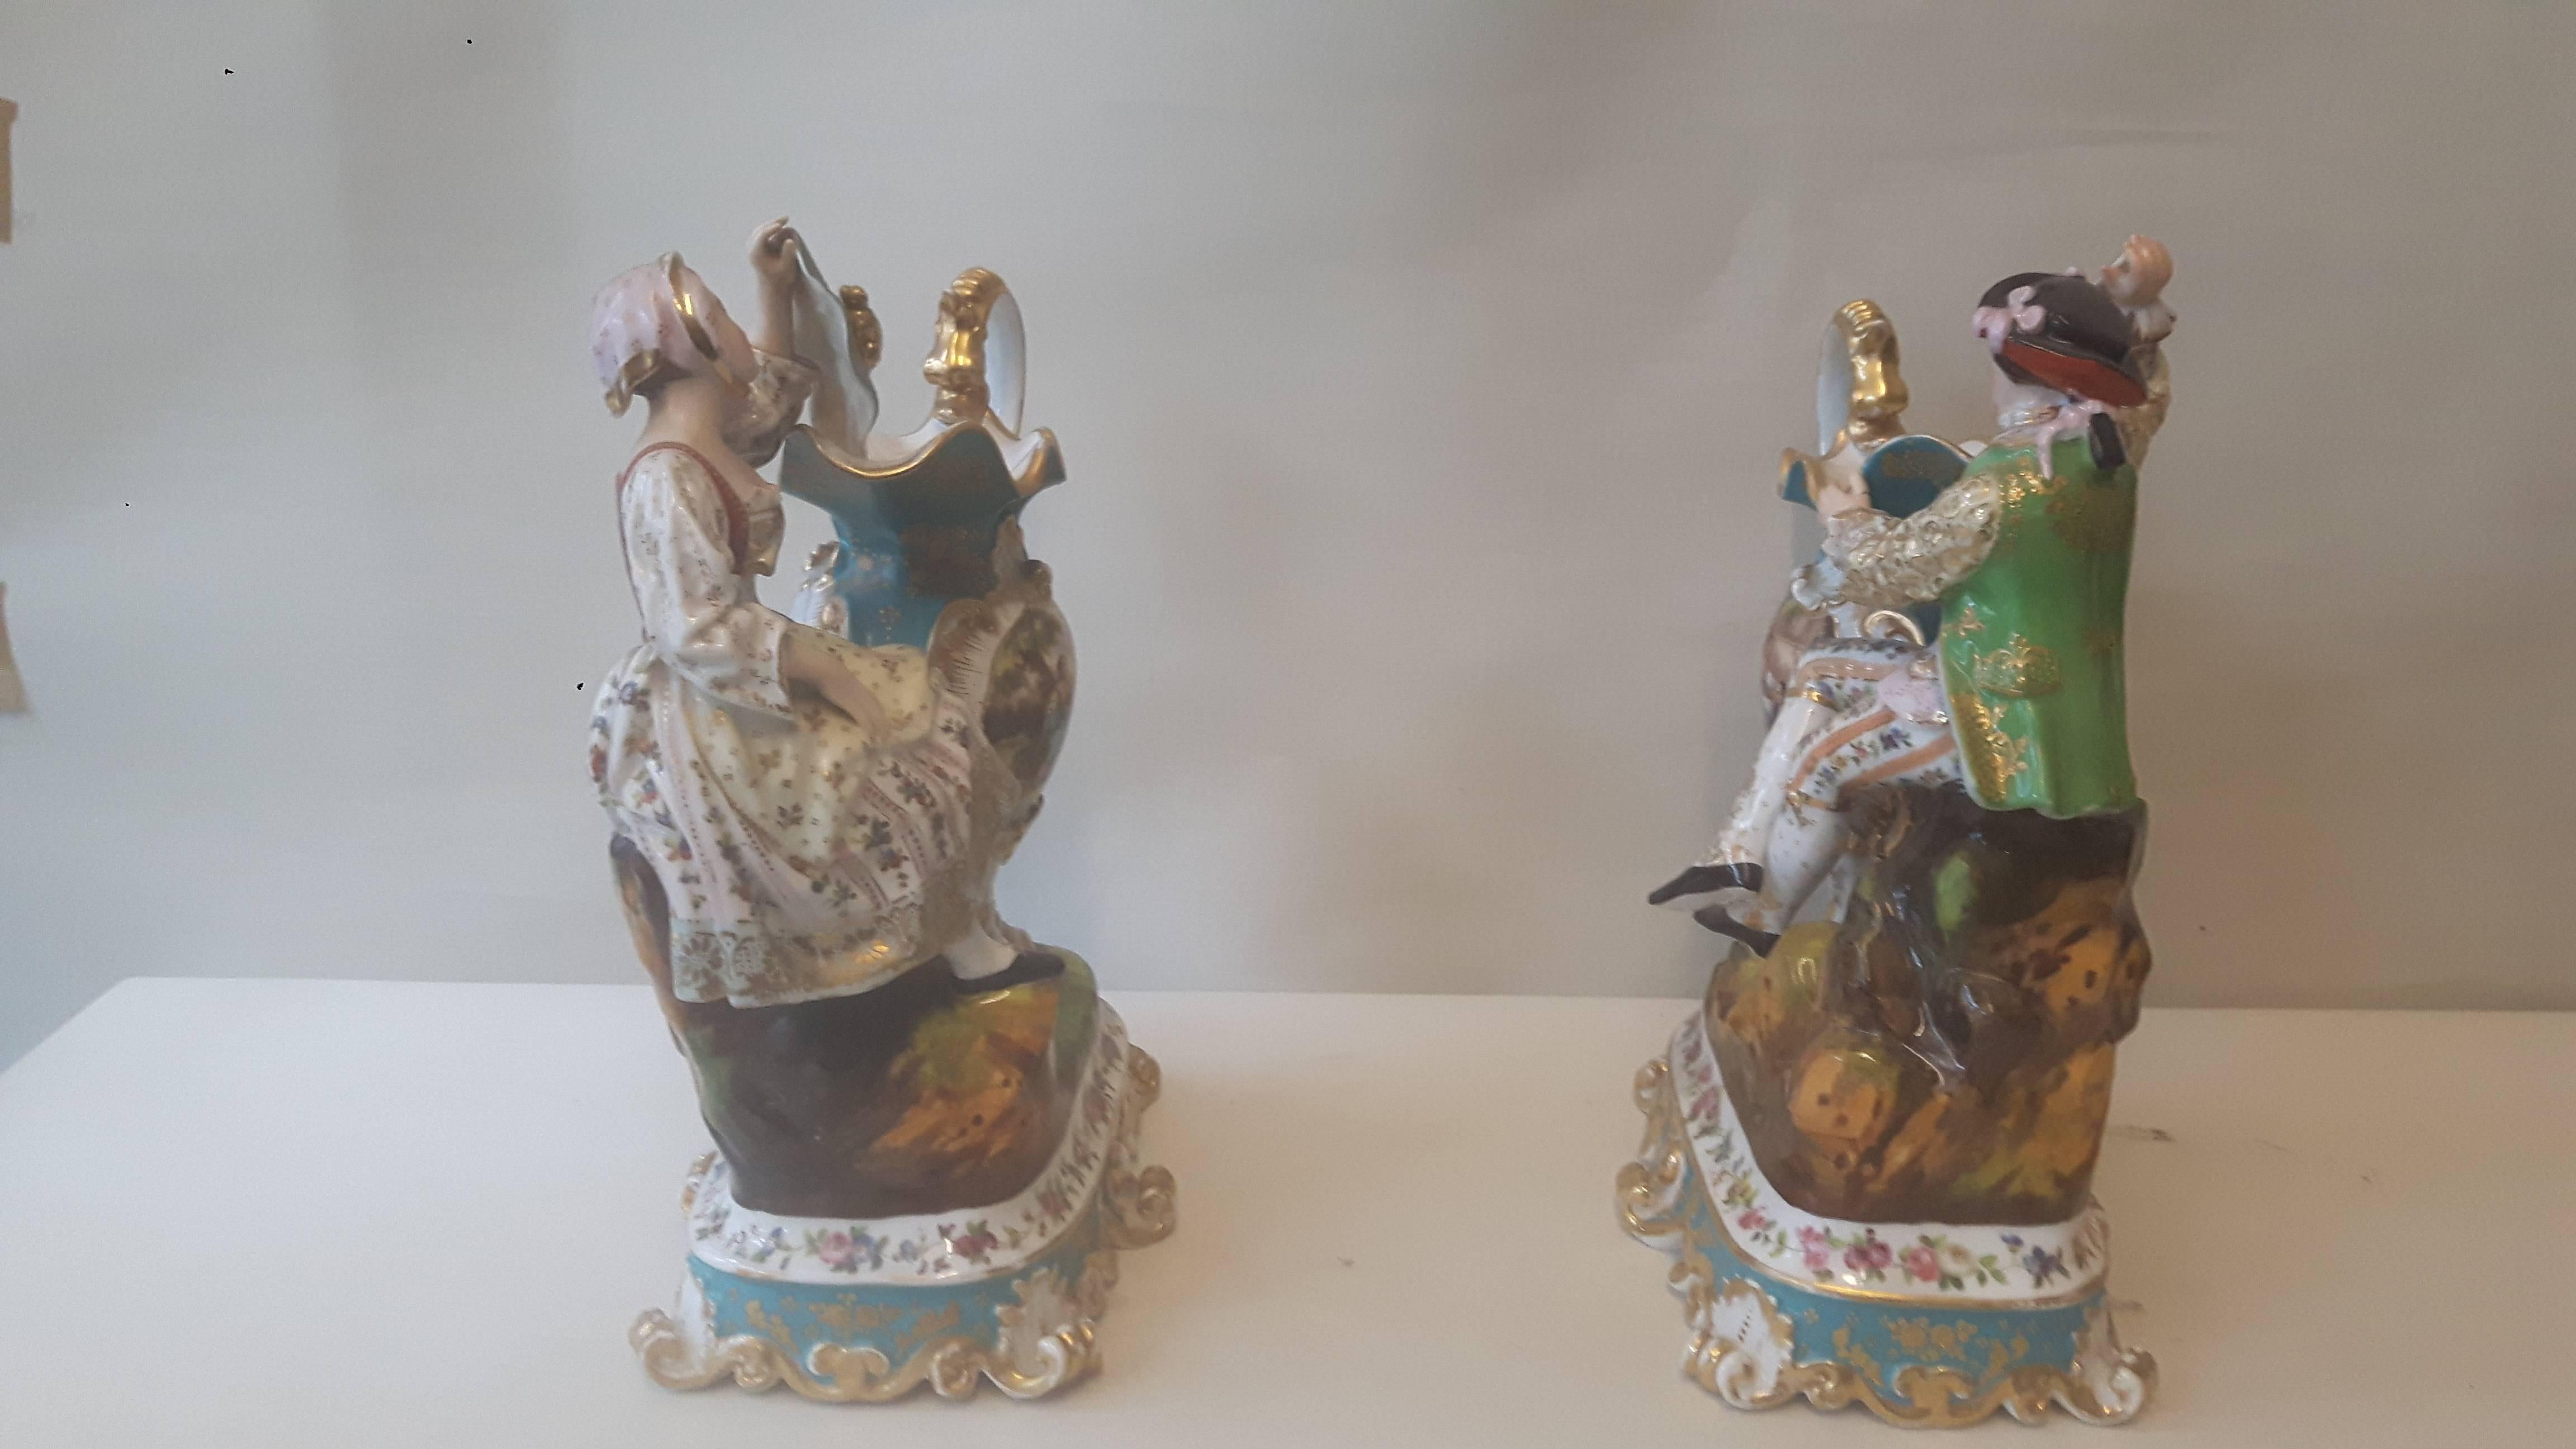 Neoclassical Pair of 19th Century French Figurines by Jacob Petit